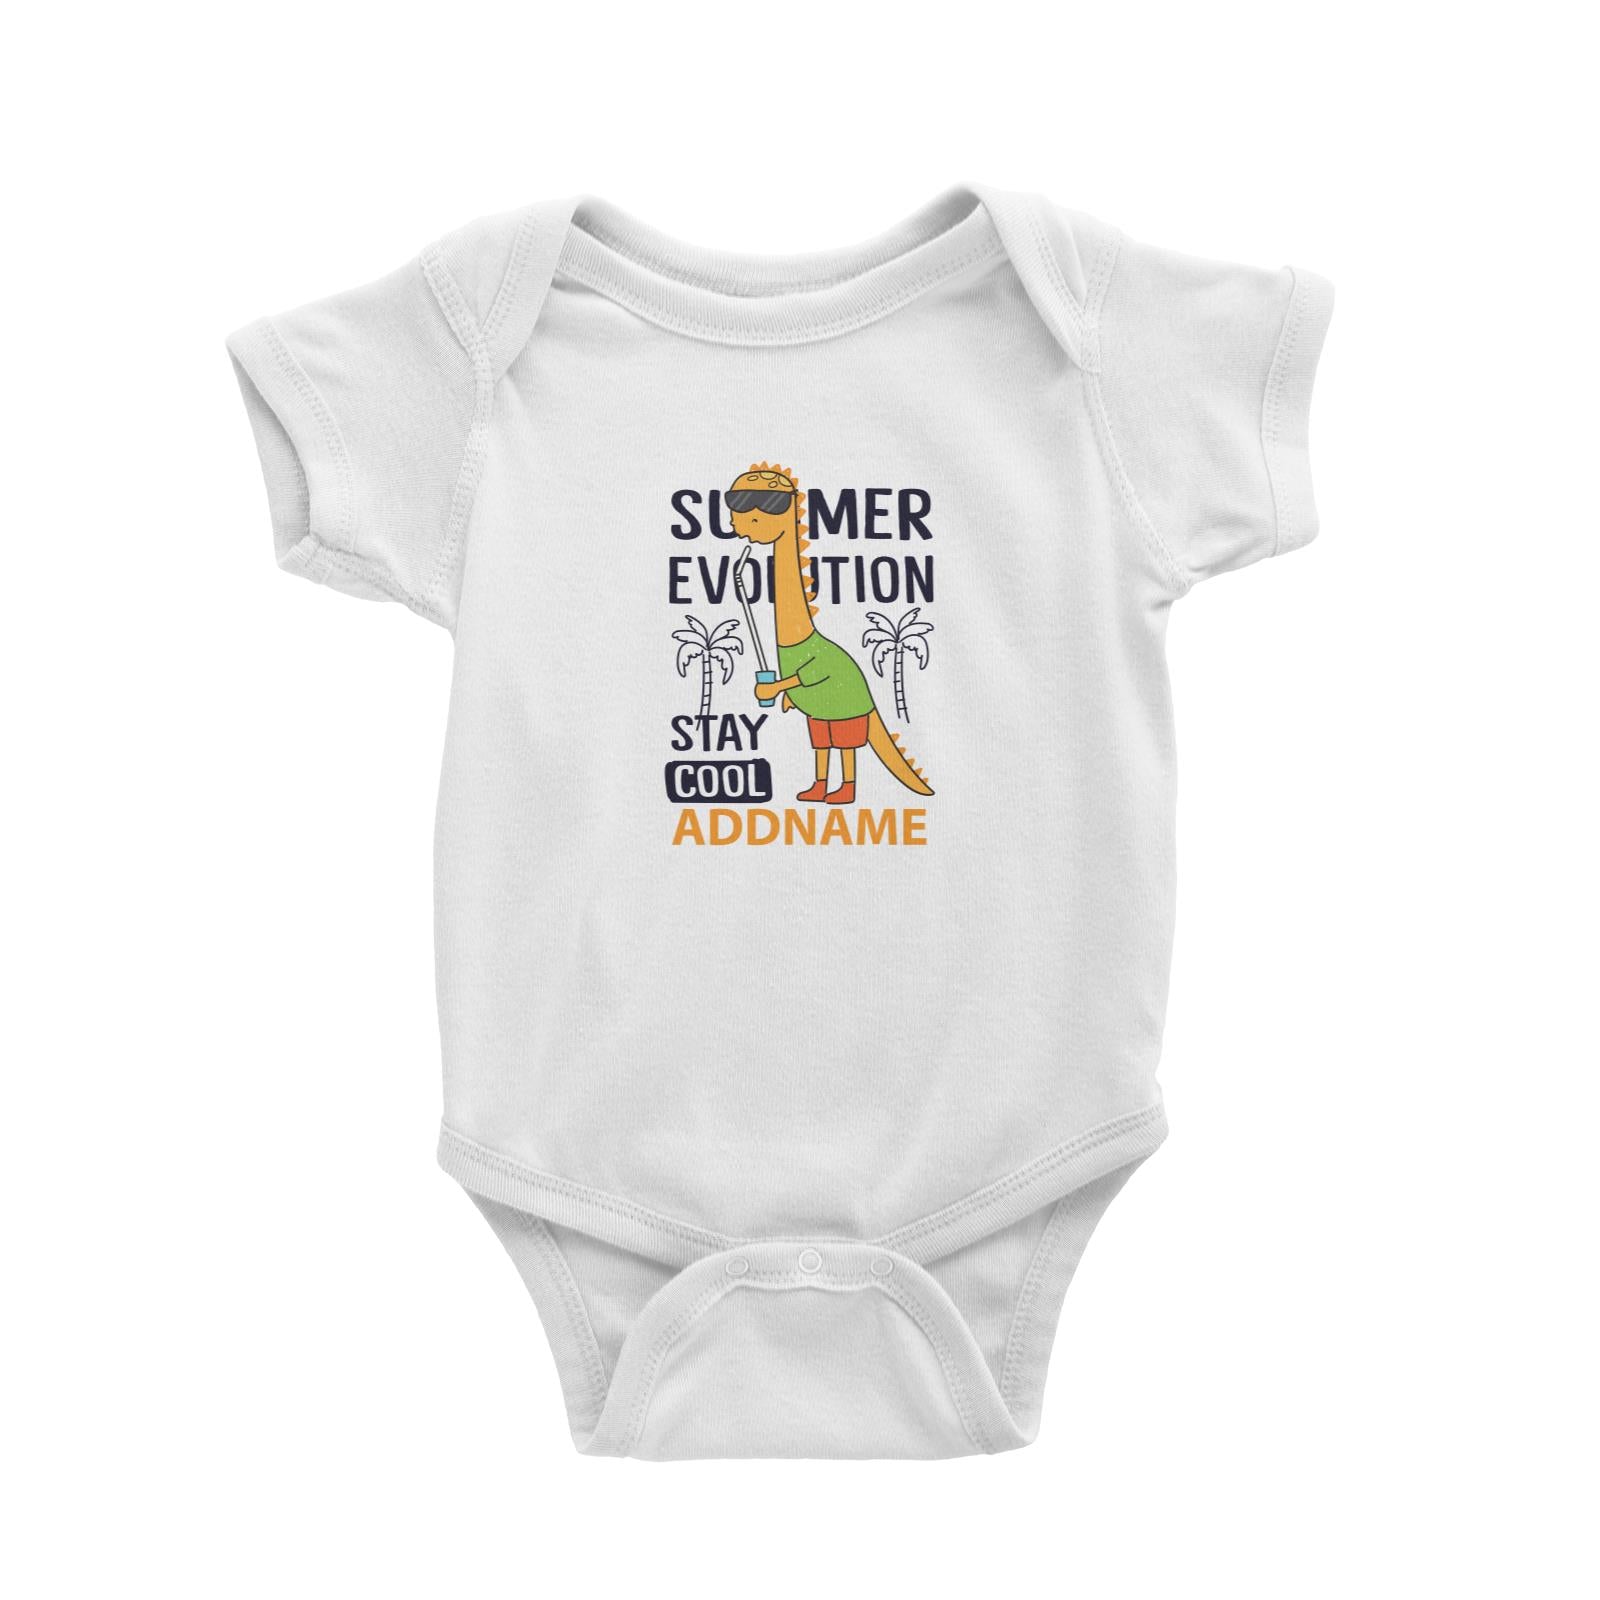 Cool Cute Dinosaur Summer Evolution Stay Cool Addname Baby Romper